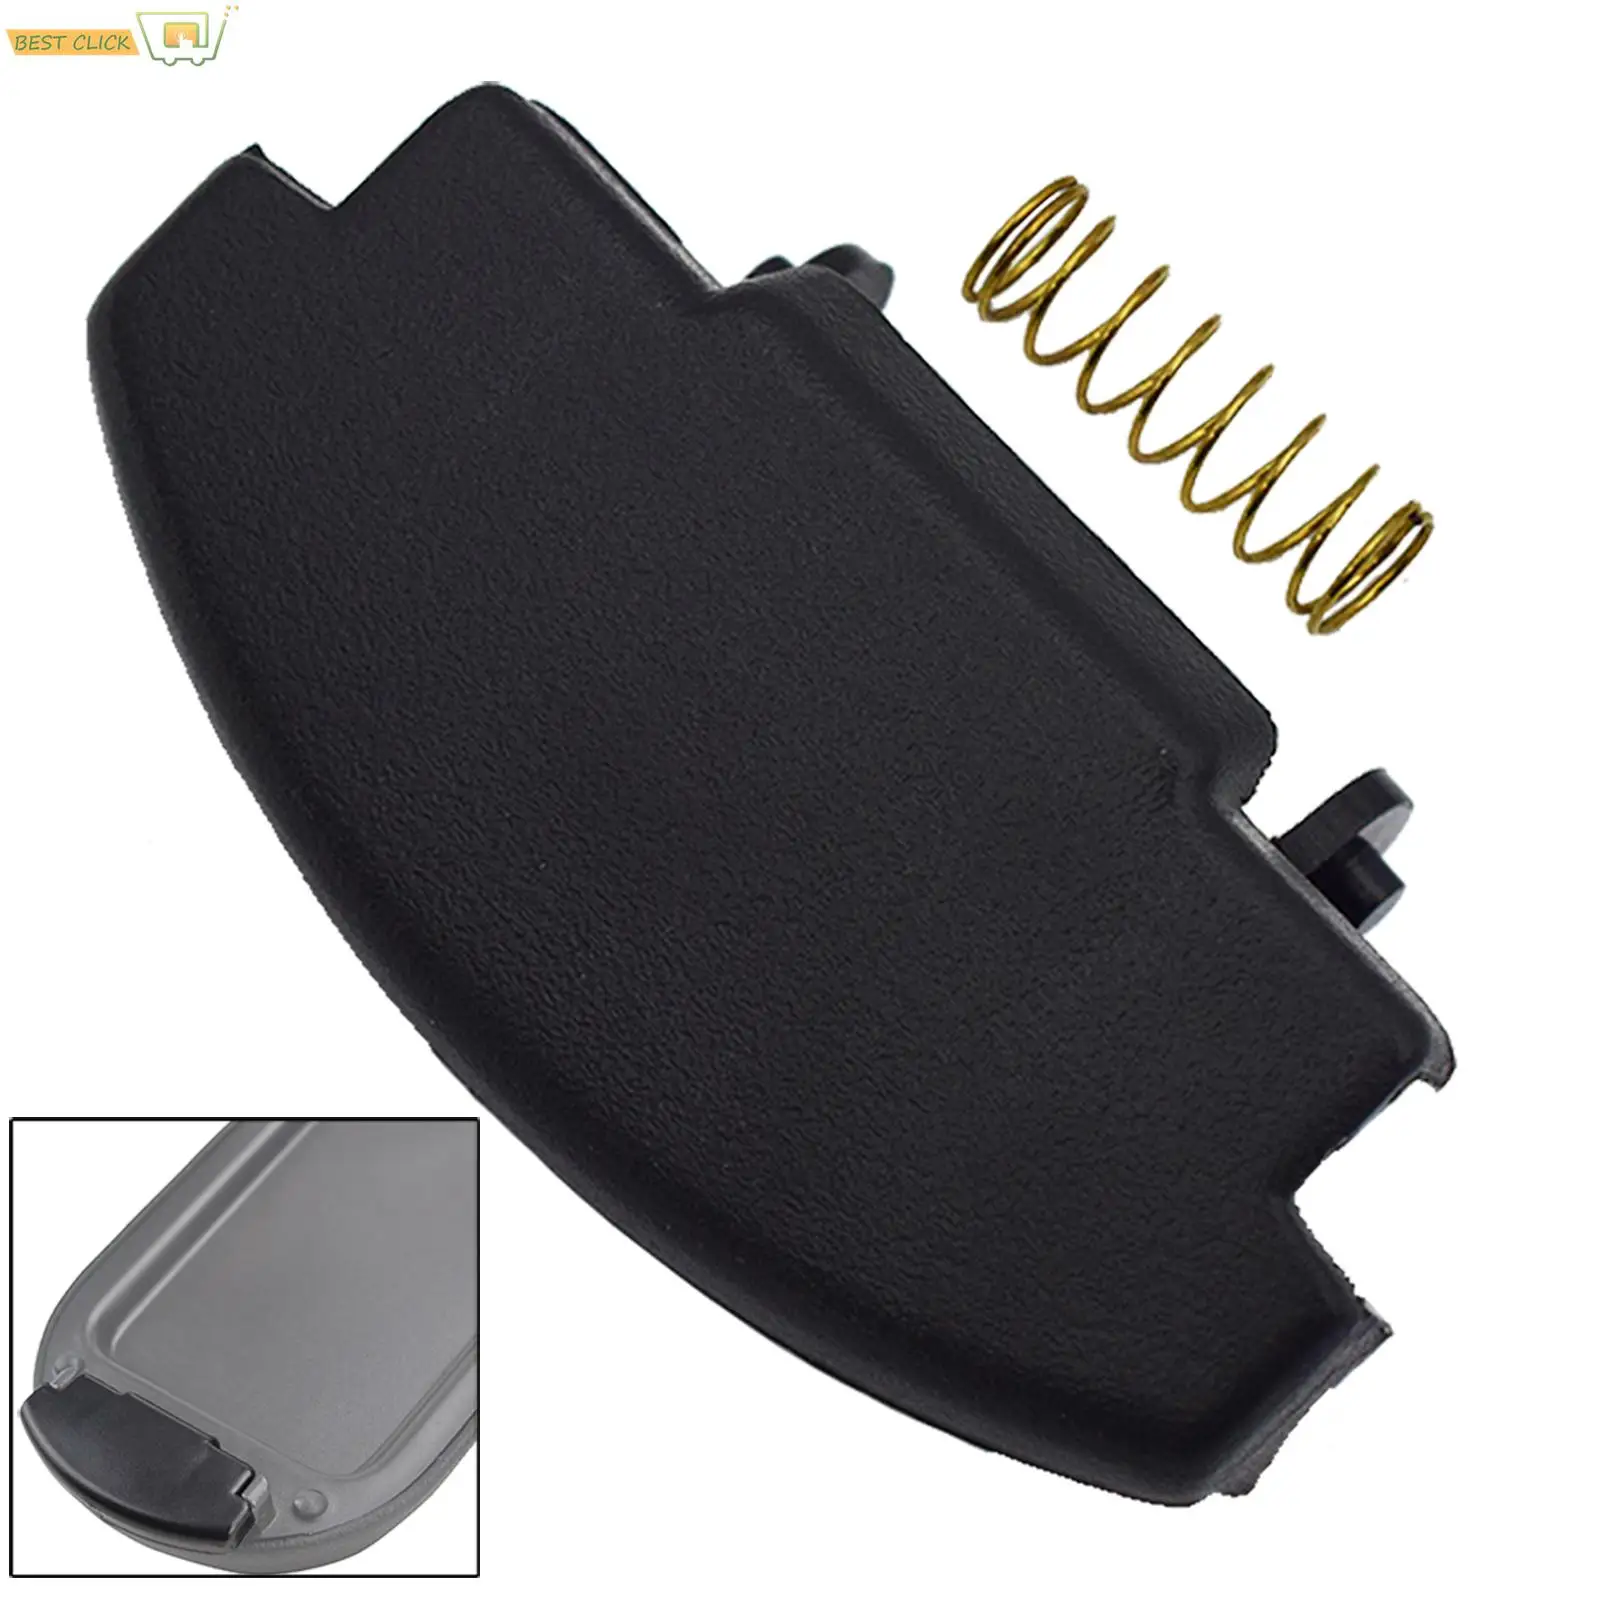 Center Console Latch Lid Lock Armrest For VW Polo 2010 2011 2012 2013 2014 2015 2016 2017 2018 Golf 4 2002 2003 2004 2005 2006